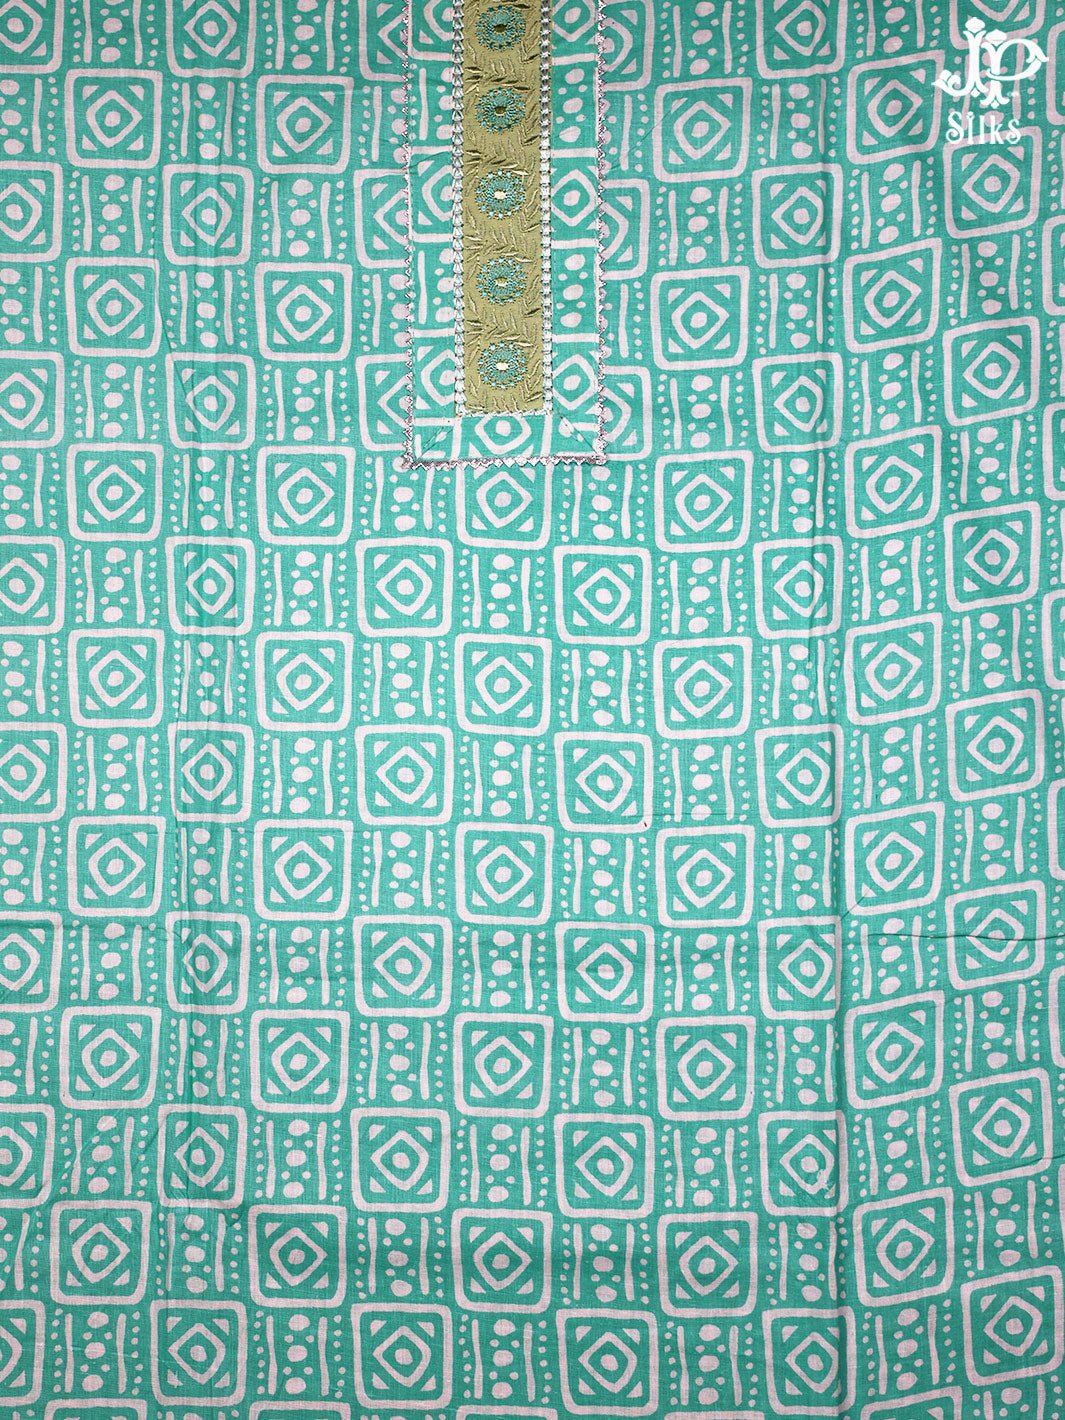 White and Turquoise Blue Cotton Chudidhar Material - D5151 - View 1